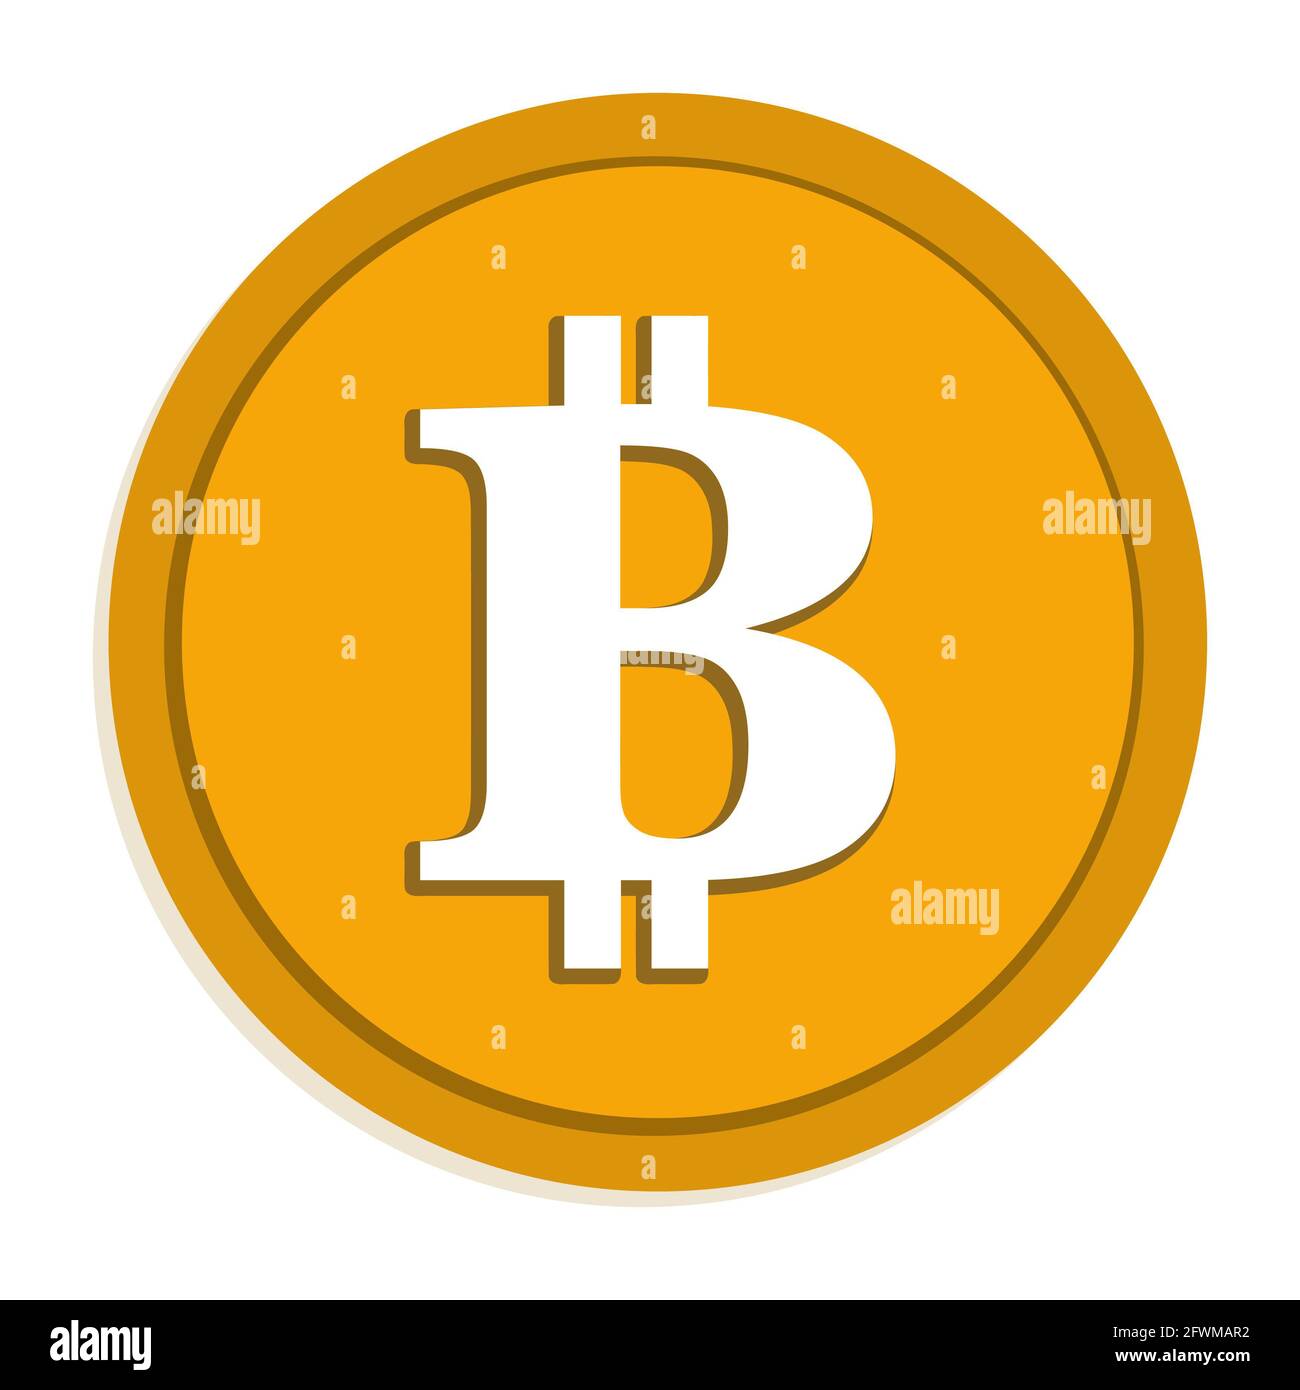 Bitcoin crypto logo isolated, gold bit coin cryptocurrency graphic design, digital currency, decentralized finance symbol, mining symbol, white backgr Stock Photo